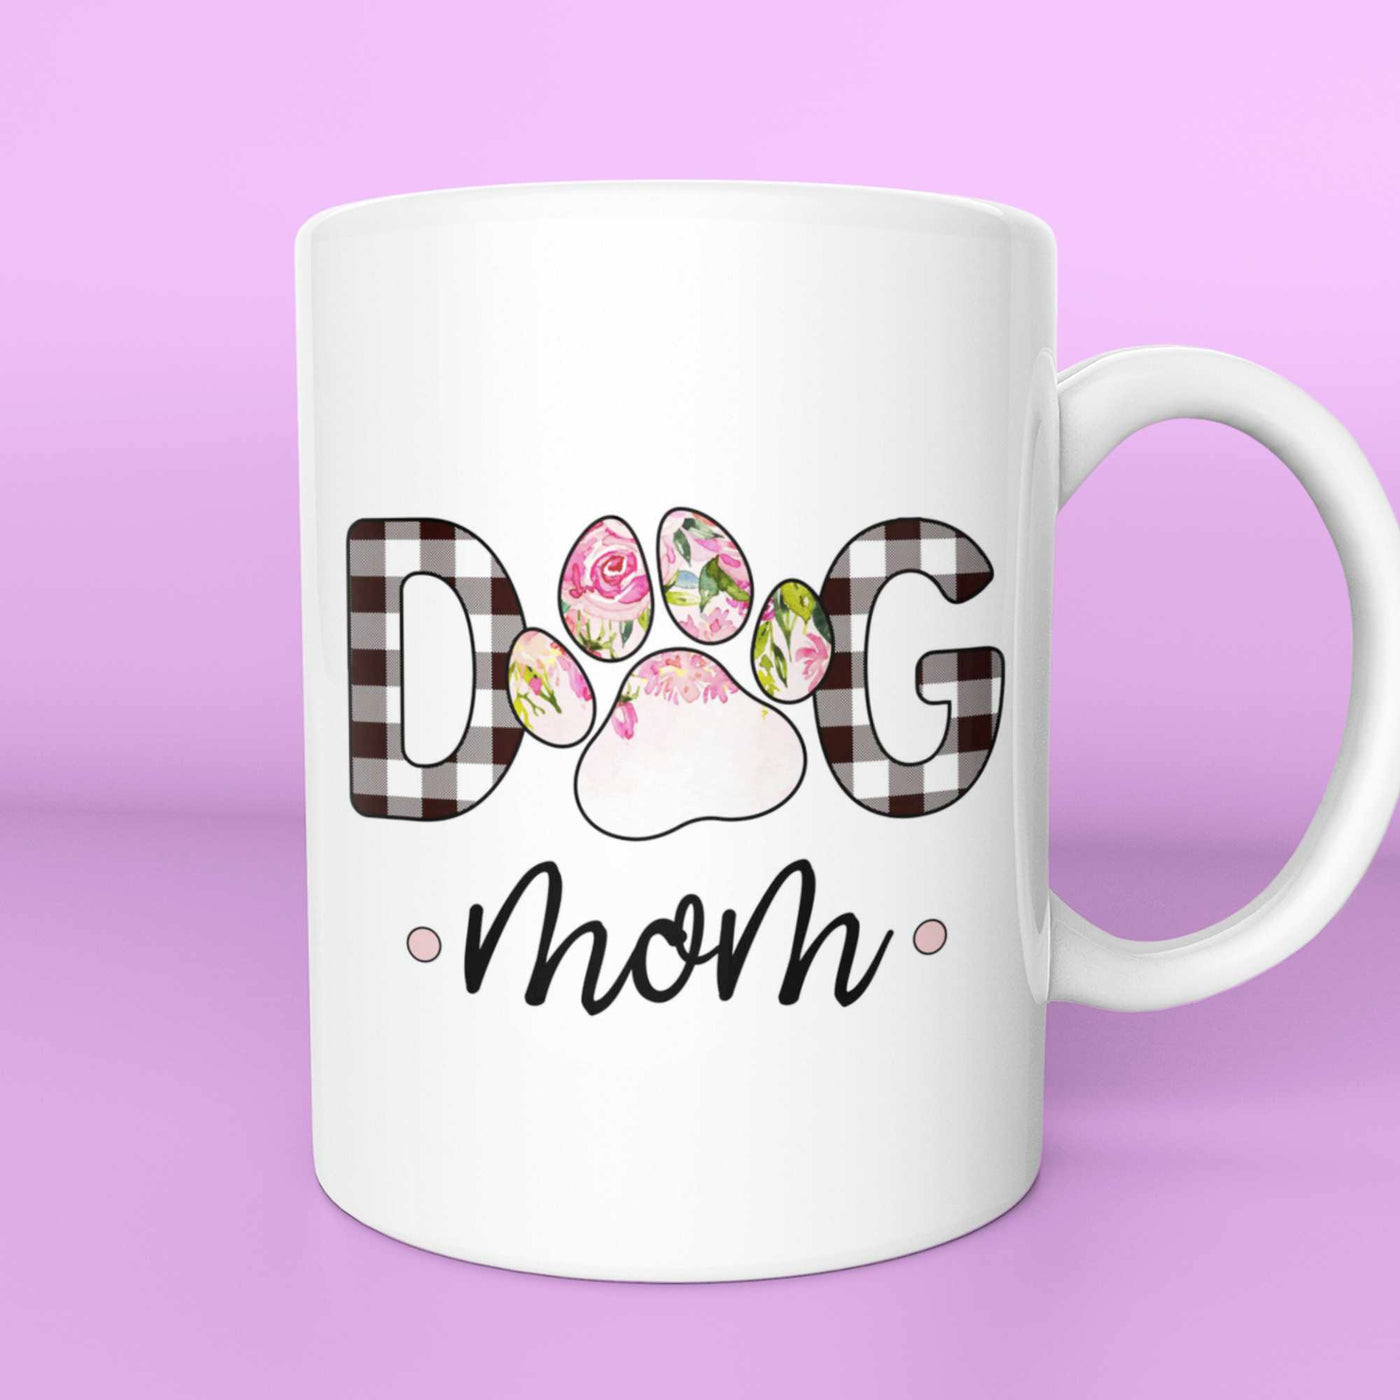 Dog Mom Mug in Floral Ombre Pattern | Pawlicious & Company